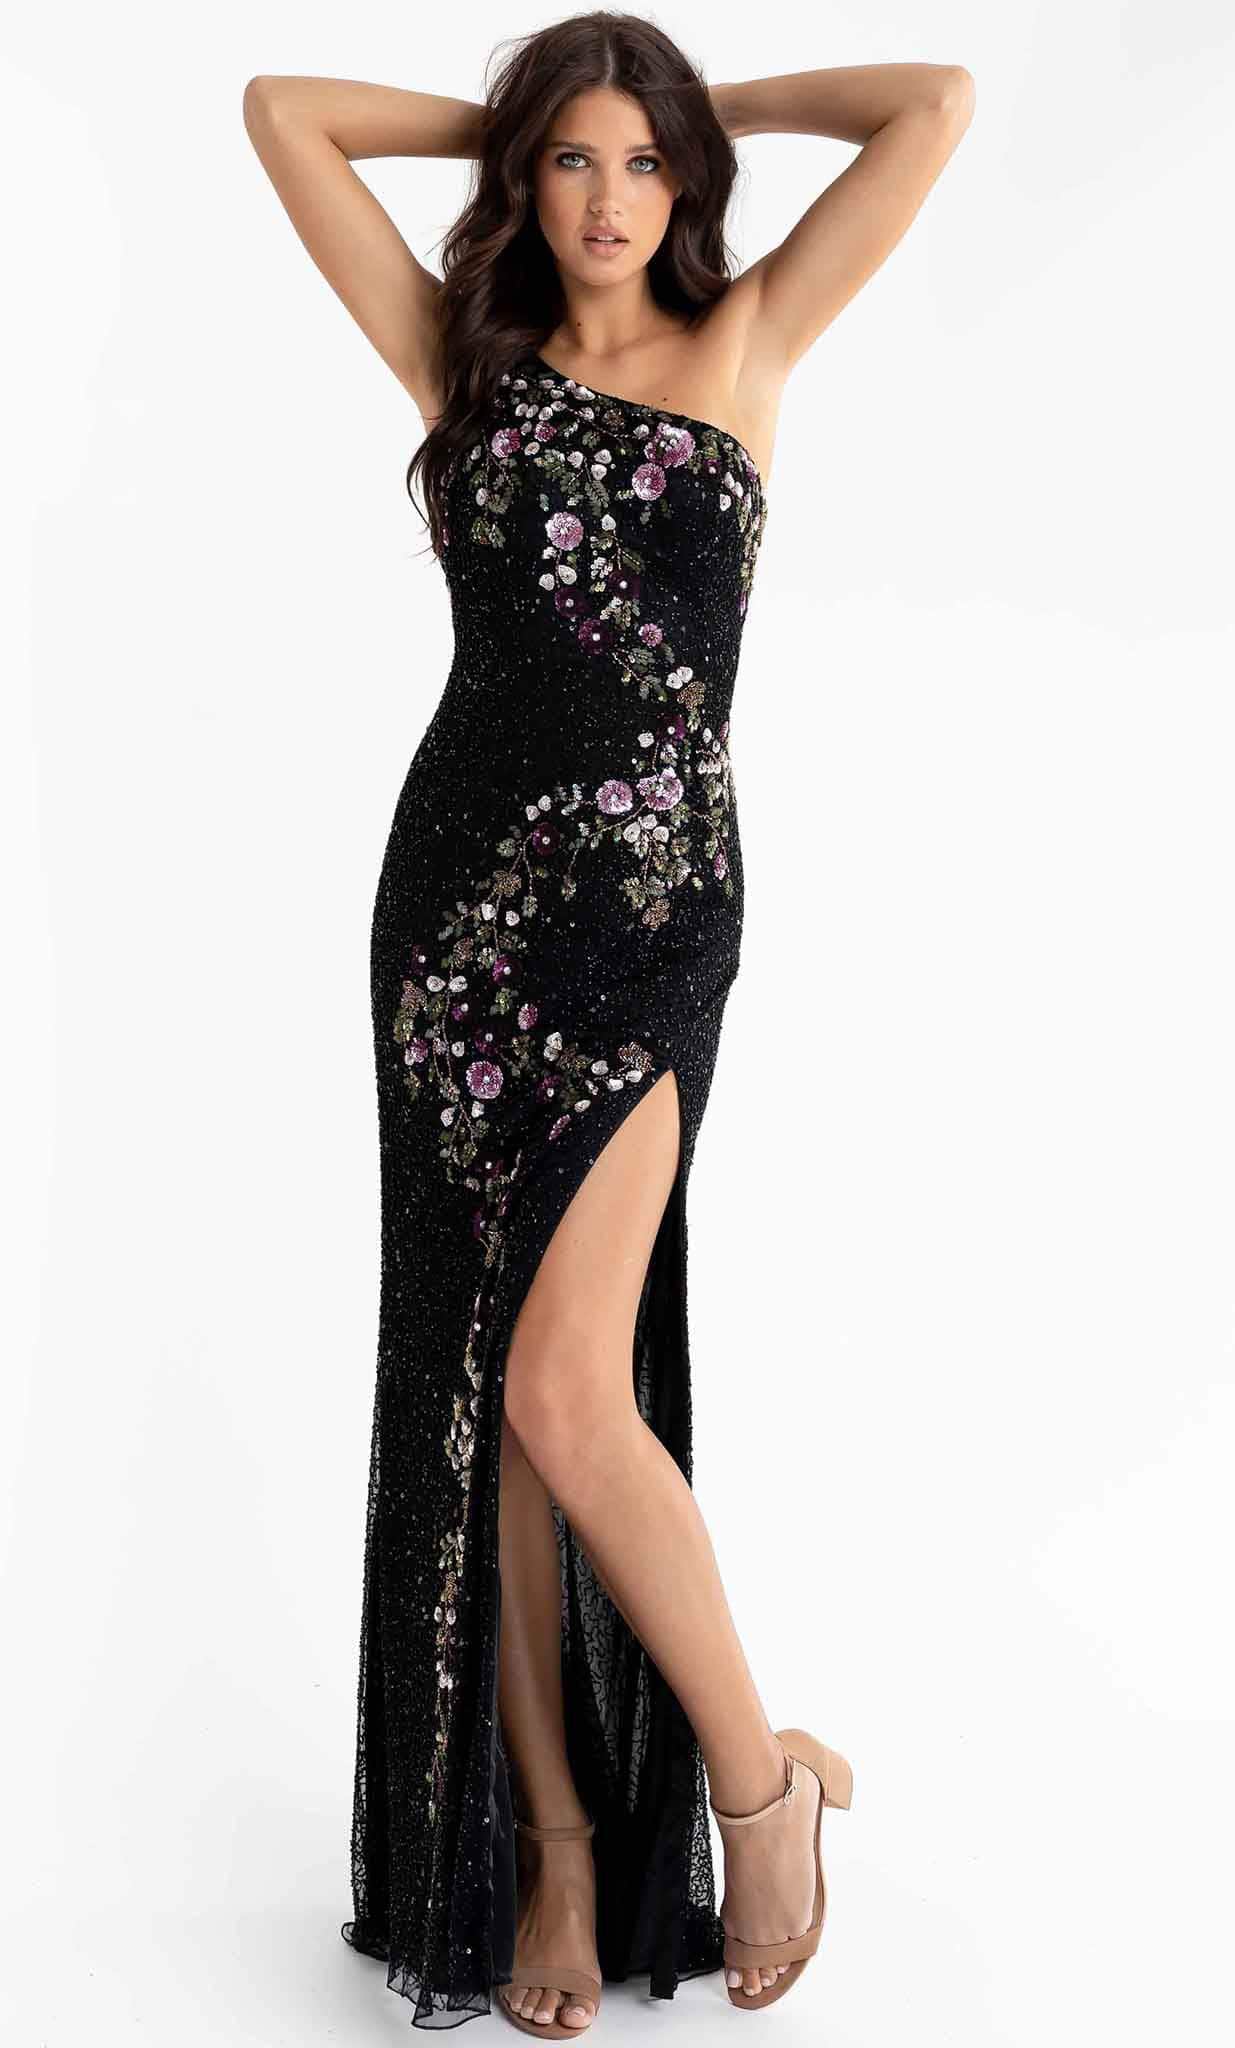 Primavera Couture 3928 - Floral Beaded Asymmetric Prom Gown Special Occasion Dress 000 / Black Multi